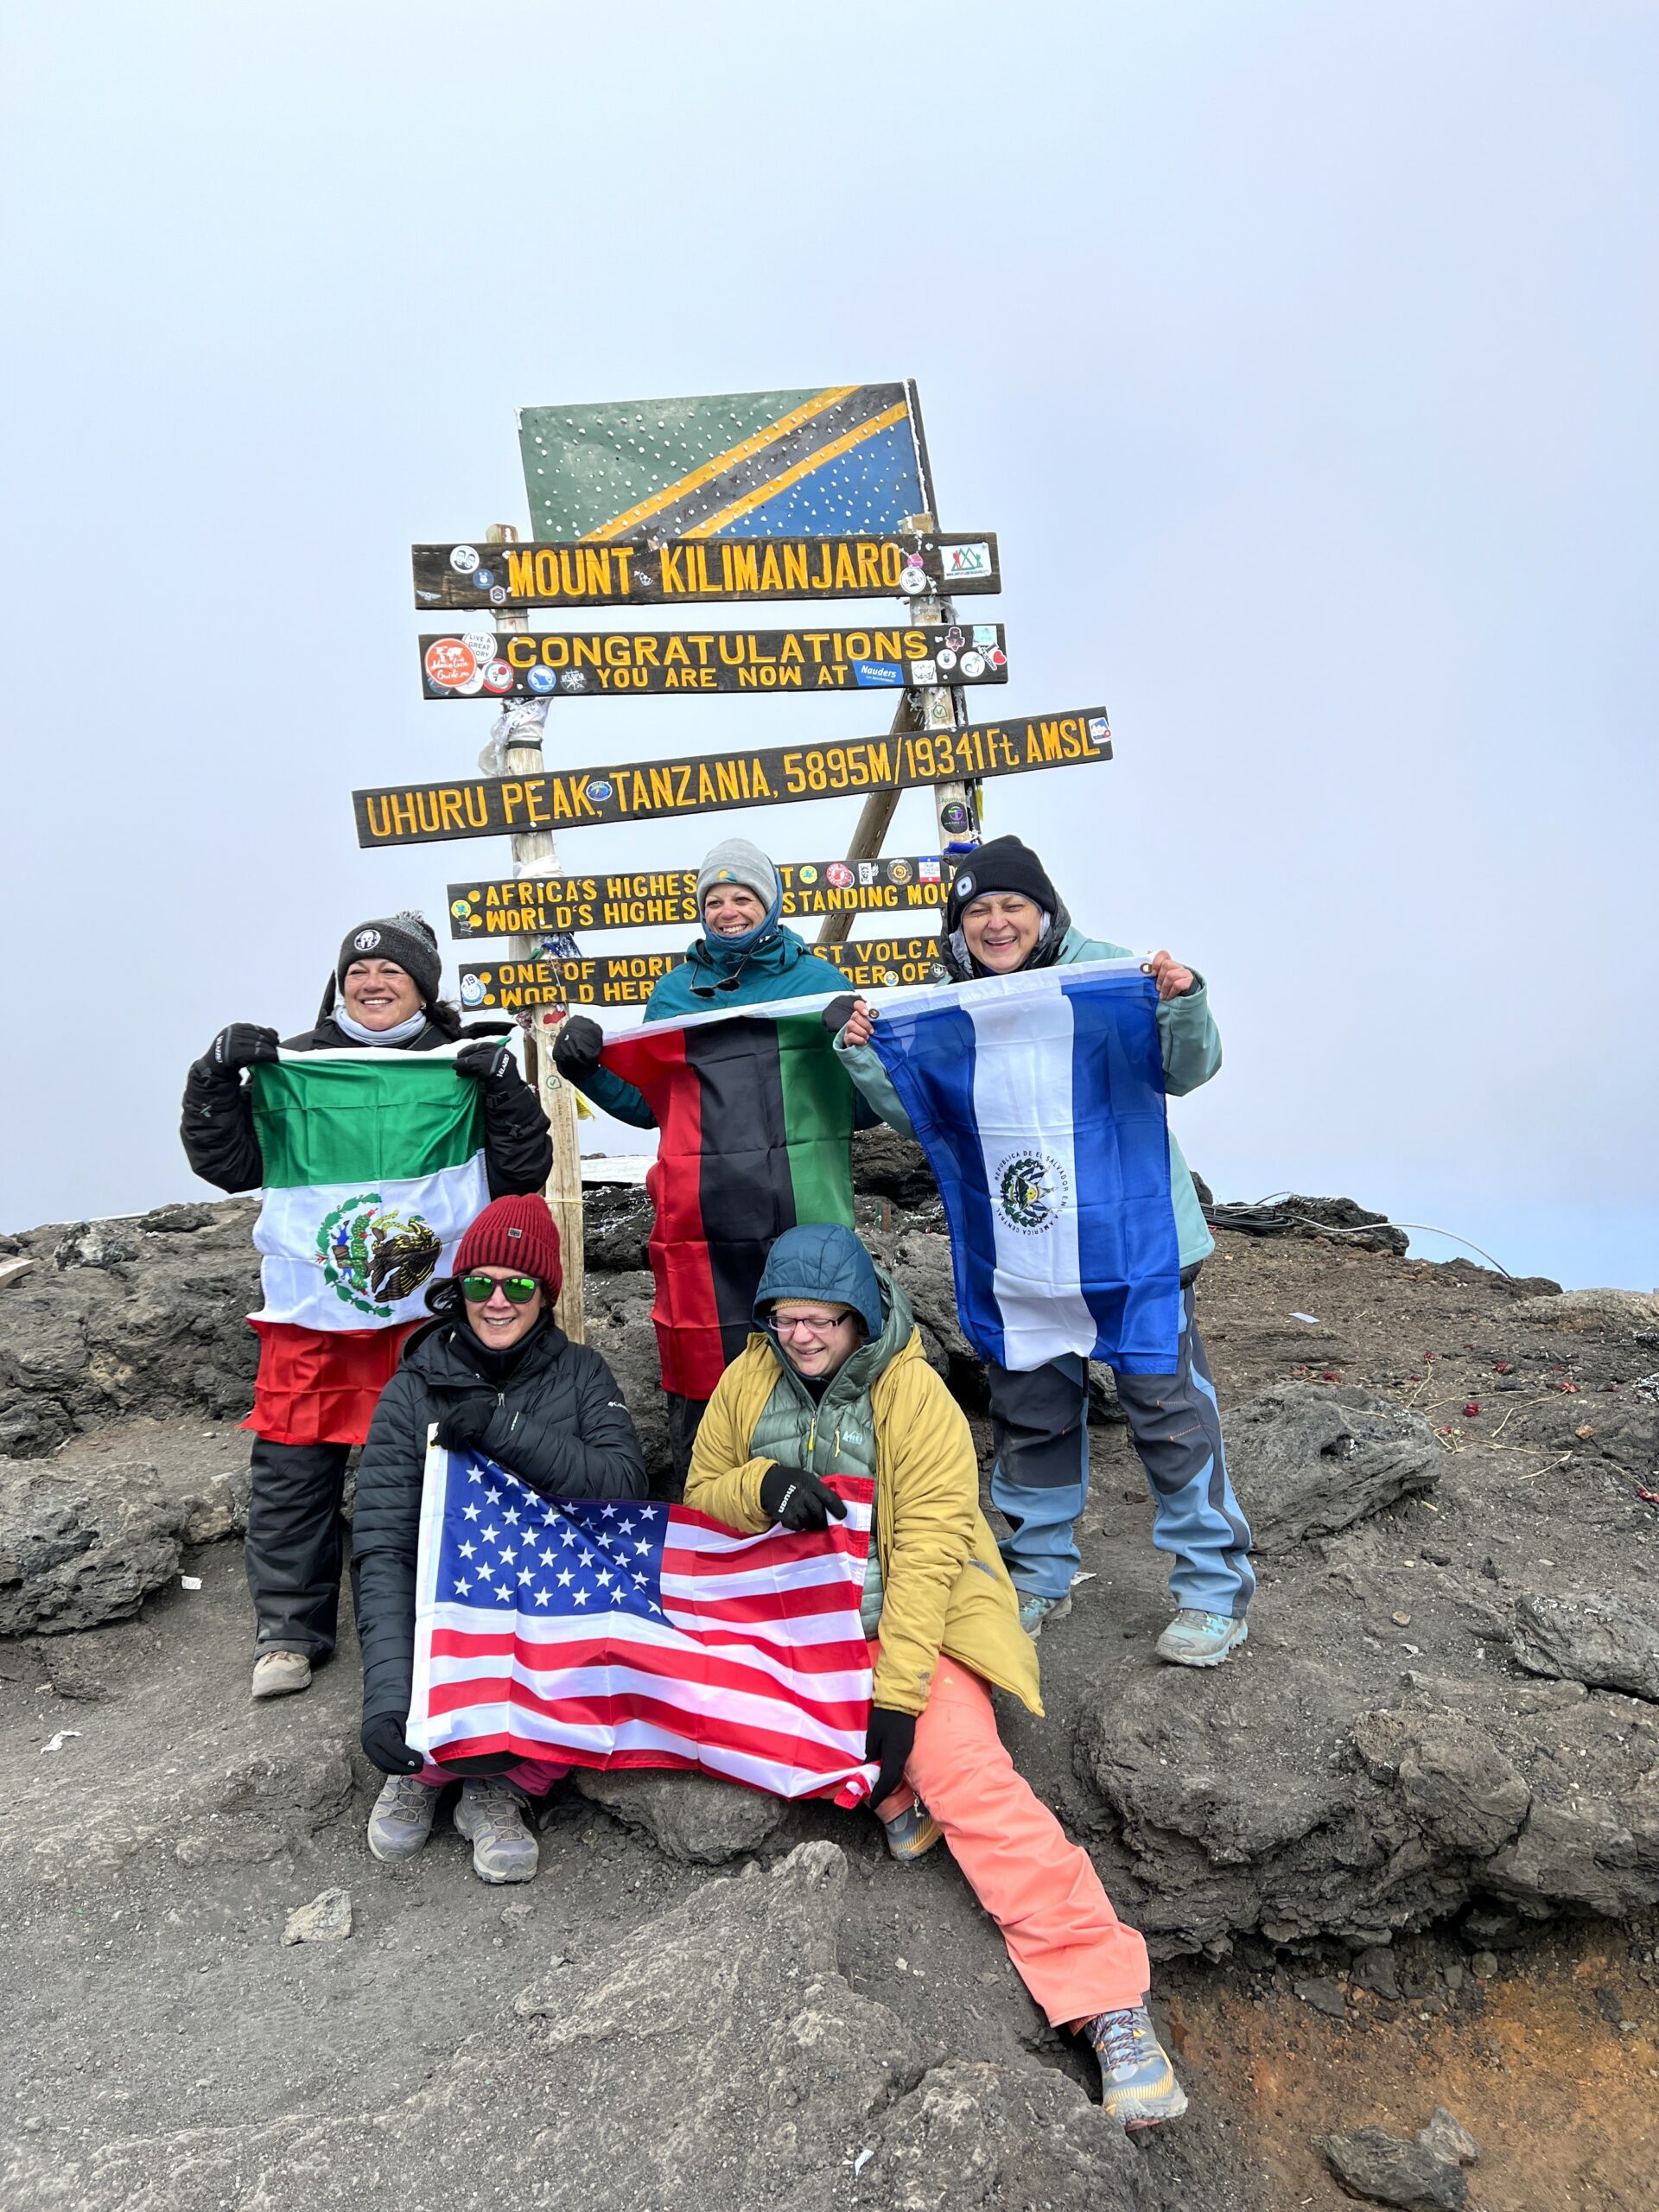 A group of women holding flags and signs at the summit of Mount Kilimanjaro.